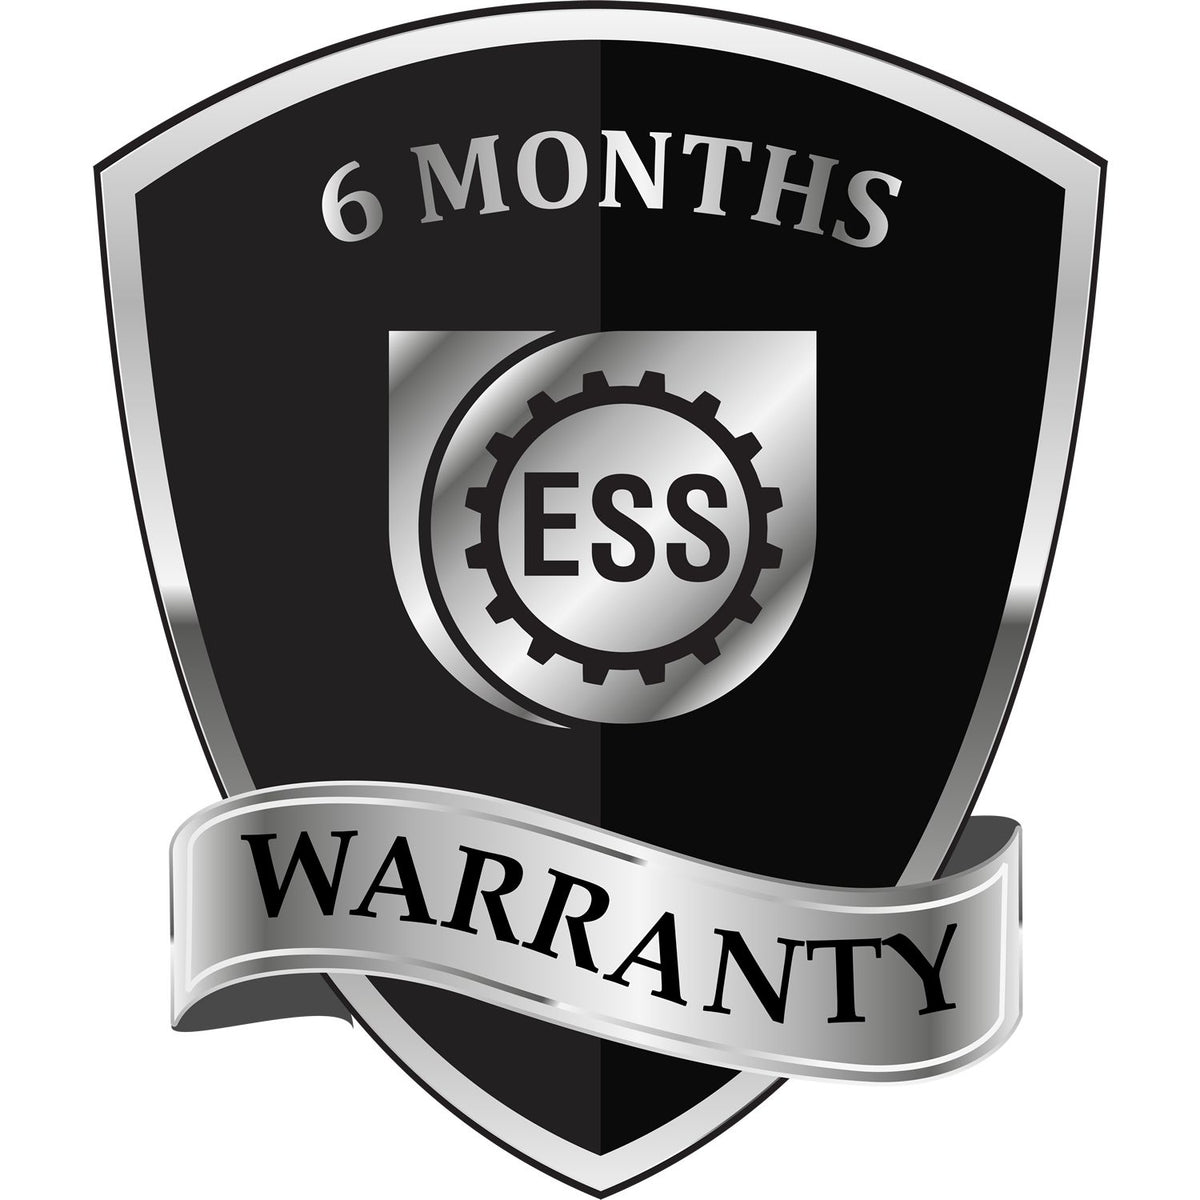 A badge or emblem showing a warranty icon for the Self-Inking California PE Stamp